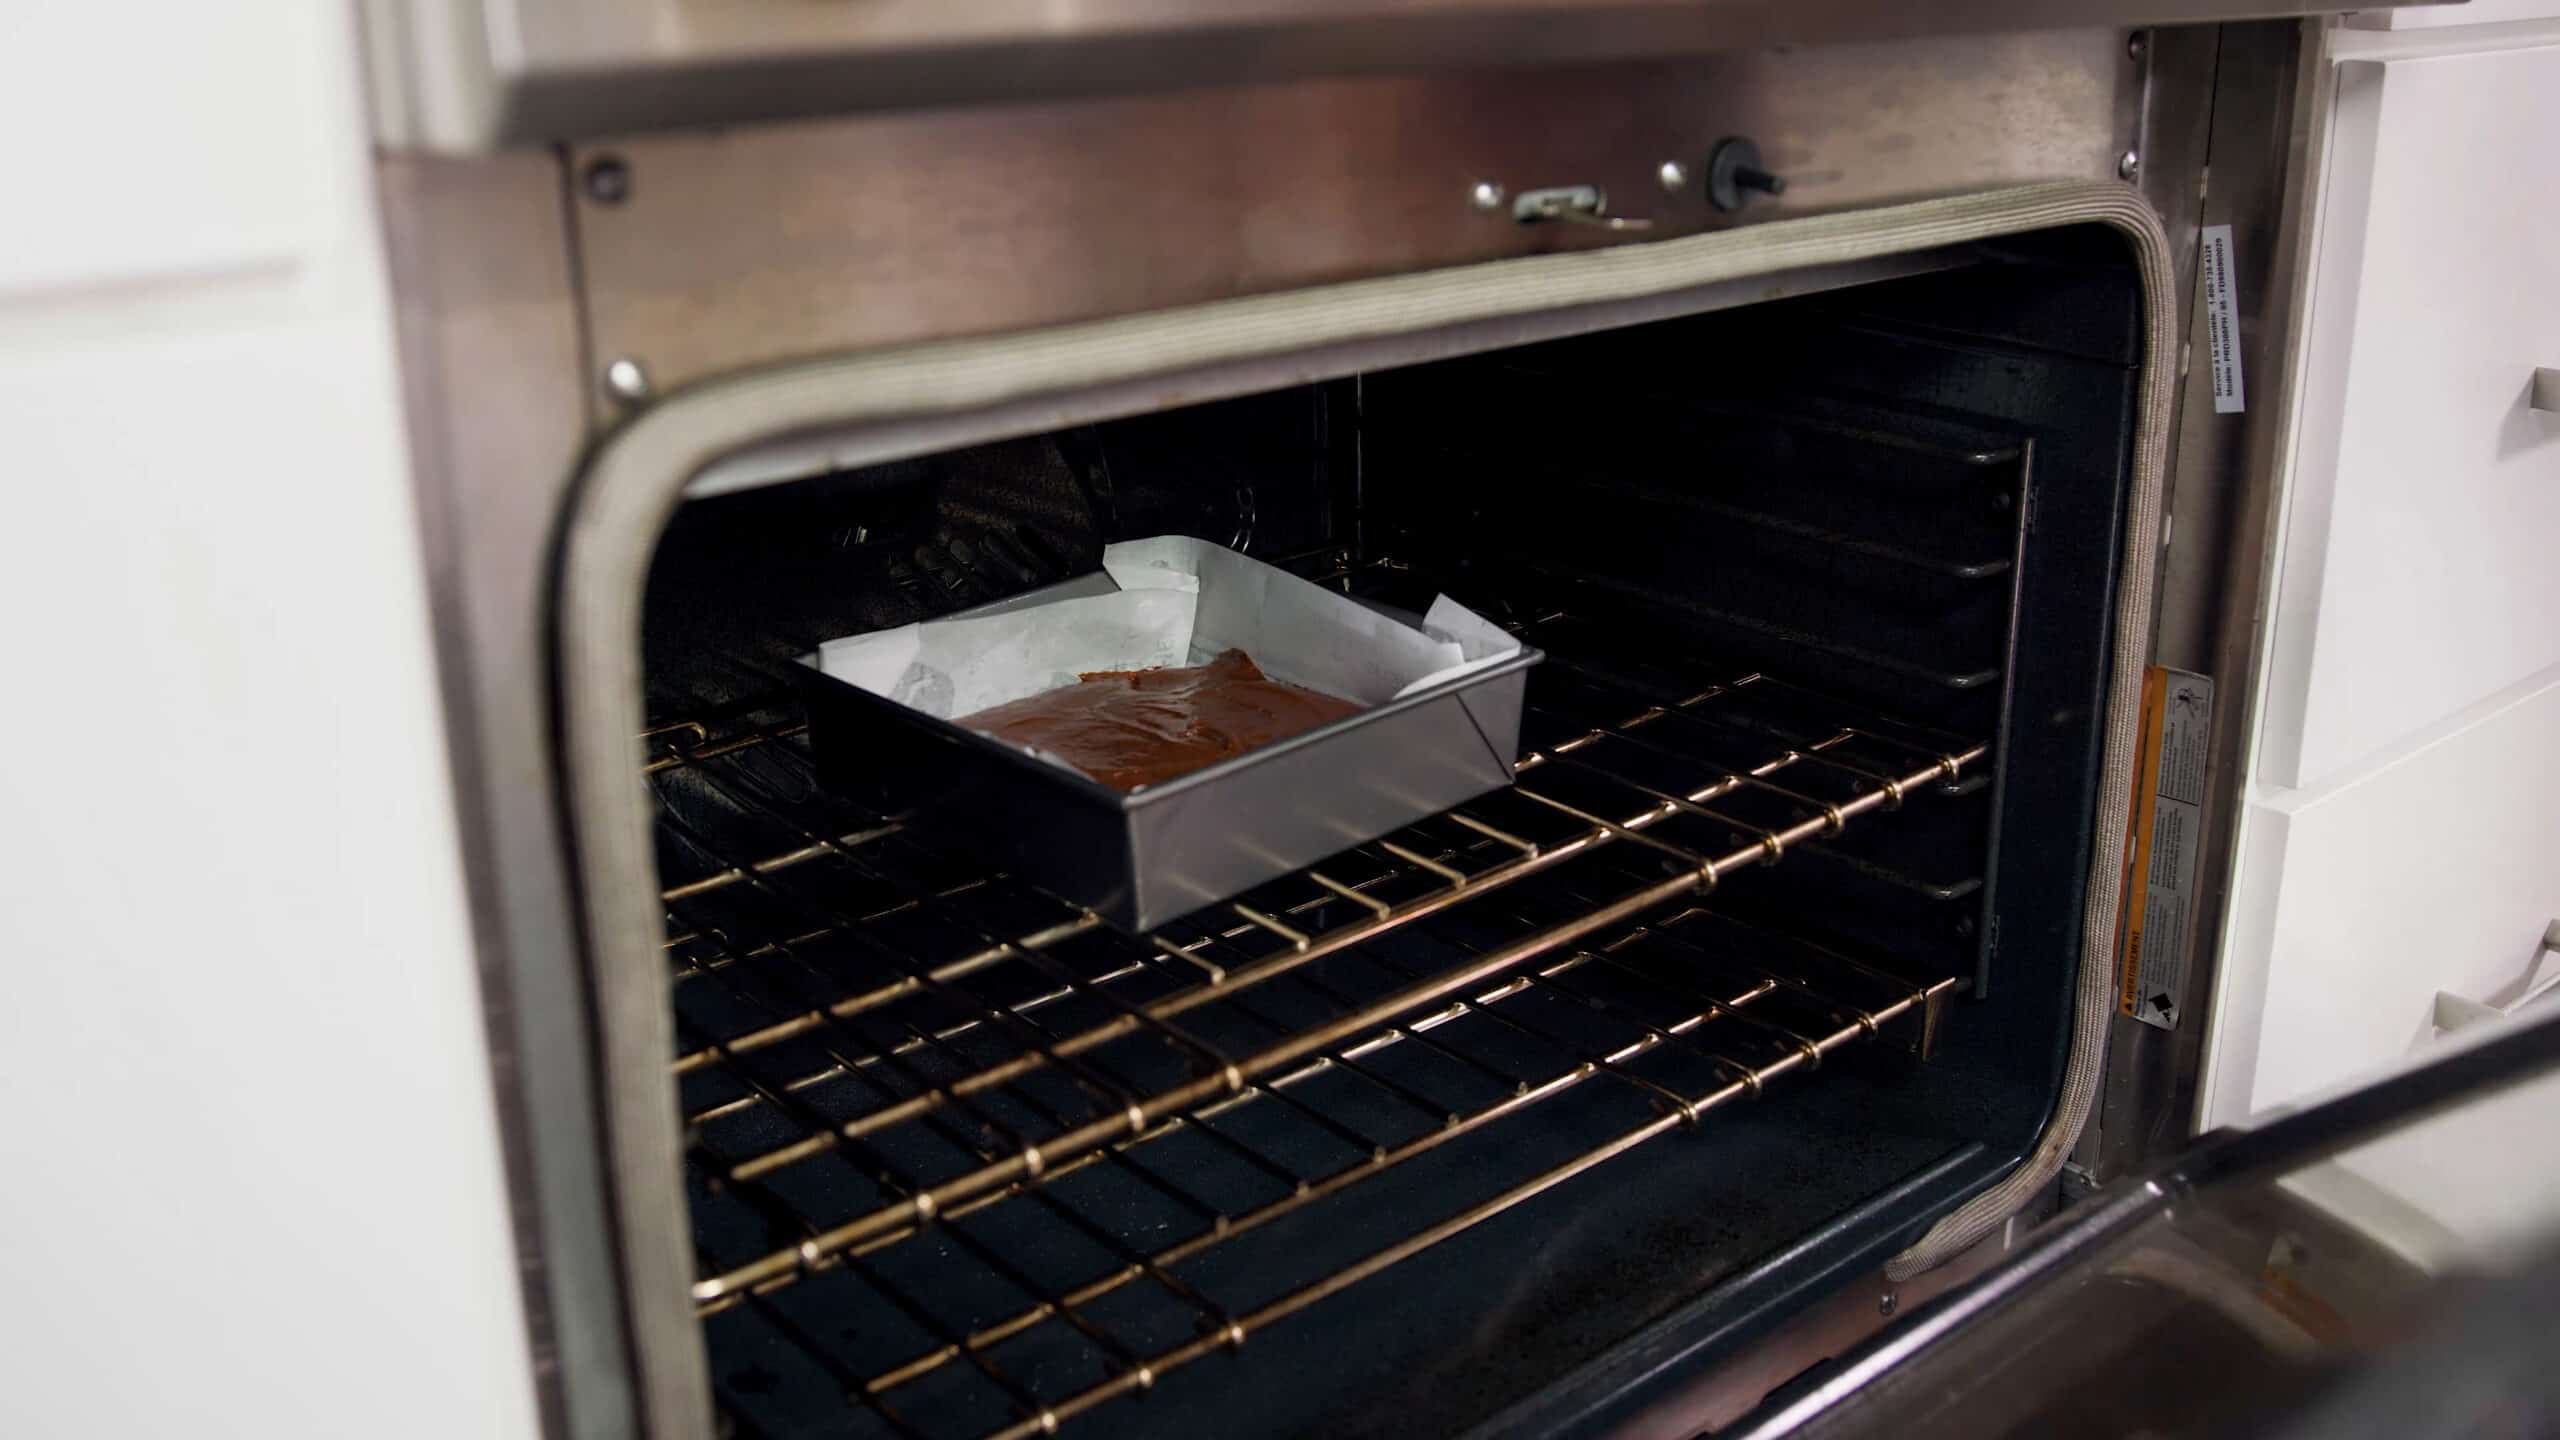 Angled view of open oven with a square metal brownie pan lined with parchment paper and filled with brownie mix placed on a metal rack in the middle of the oven.